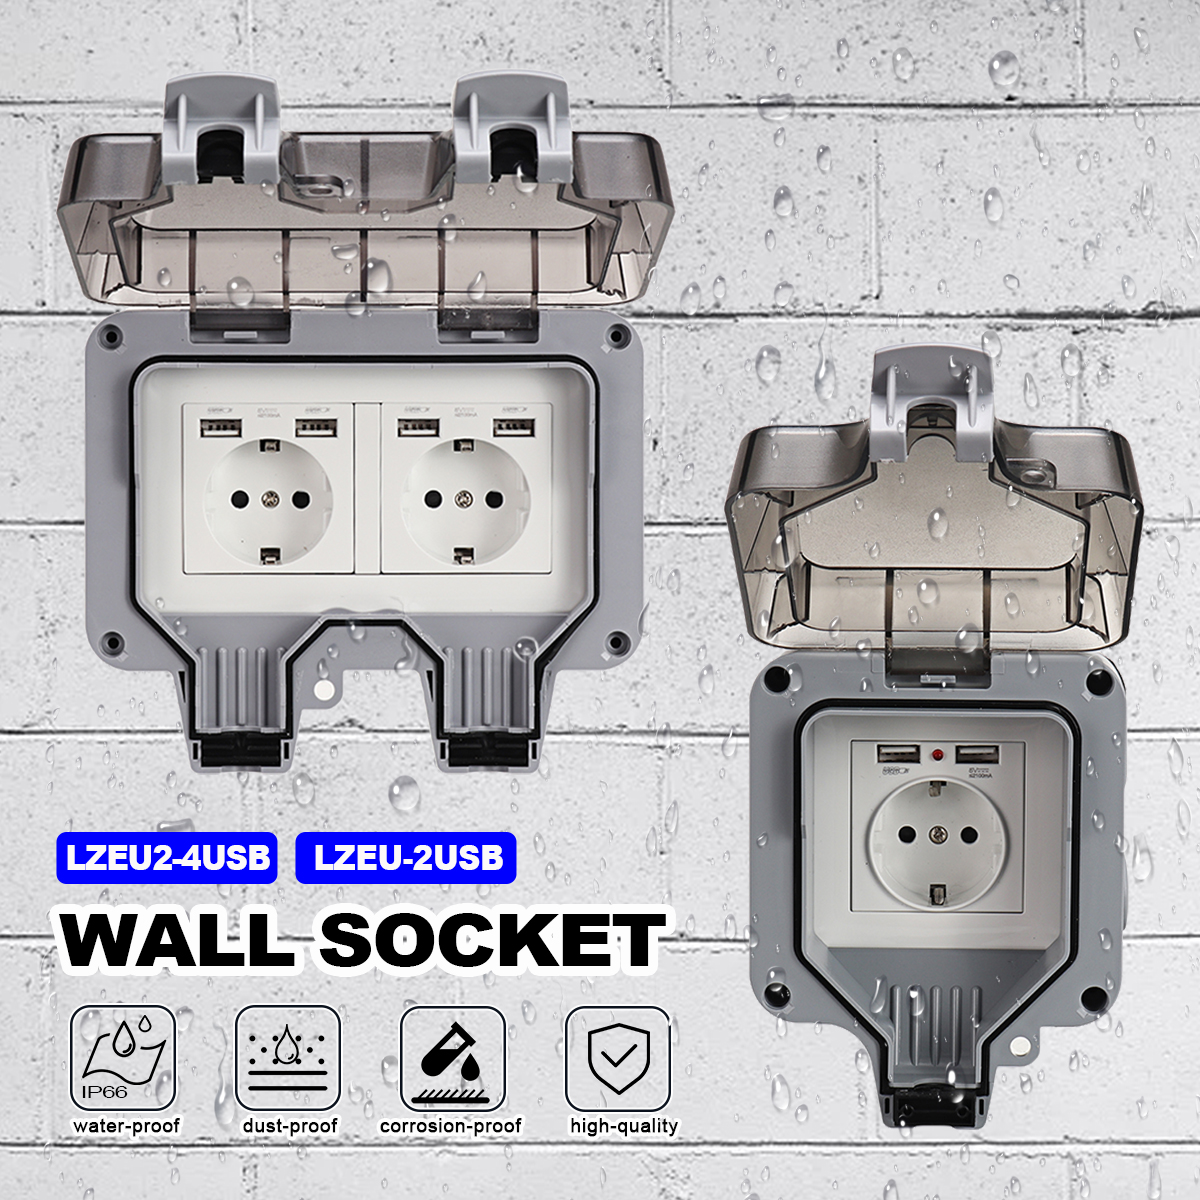 Outdoor-Waterproof-USB-Socket-Wall-Outlet-Air-Conditioner-Outlet-EU-UK-US-GER-PLUG-1947360-2